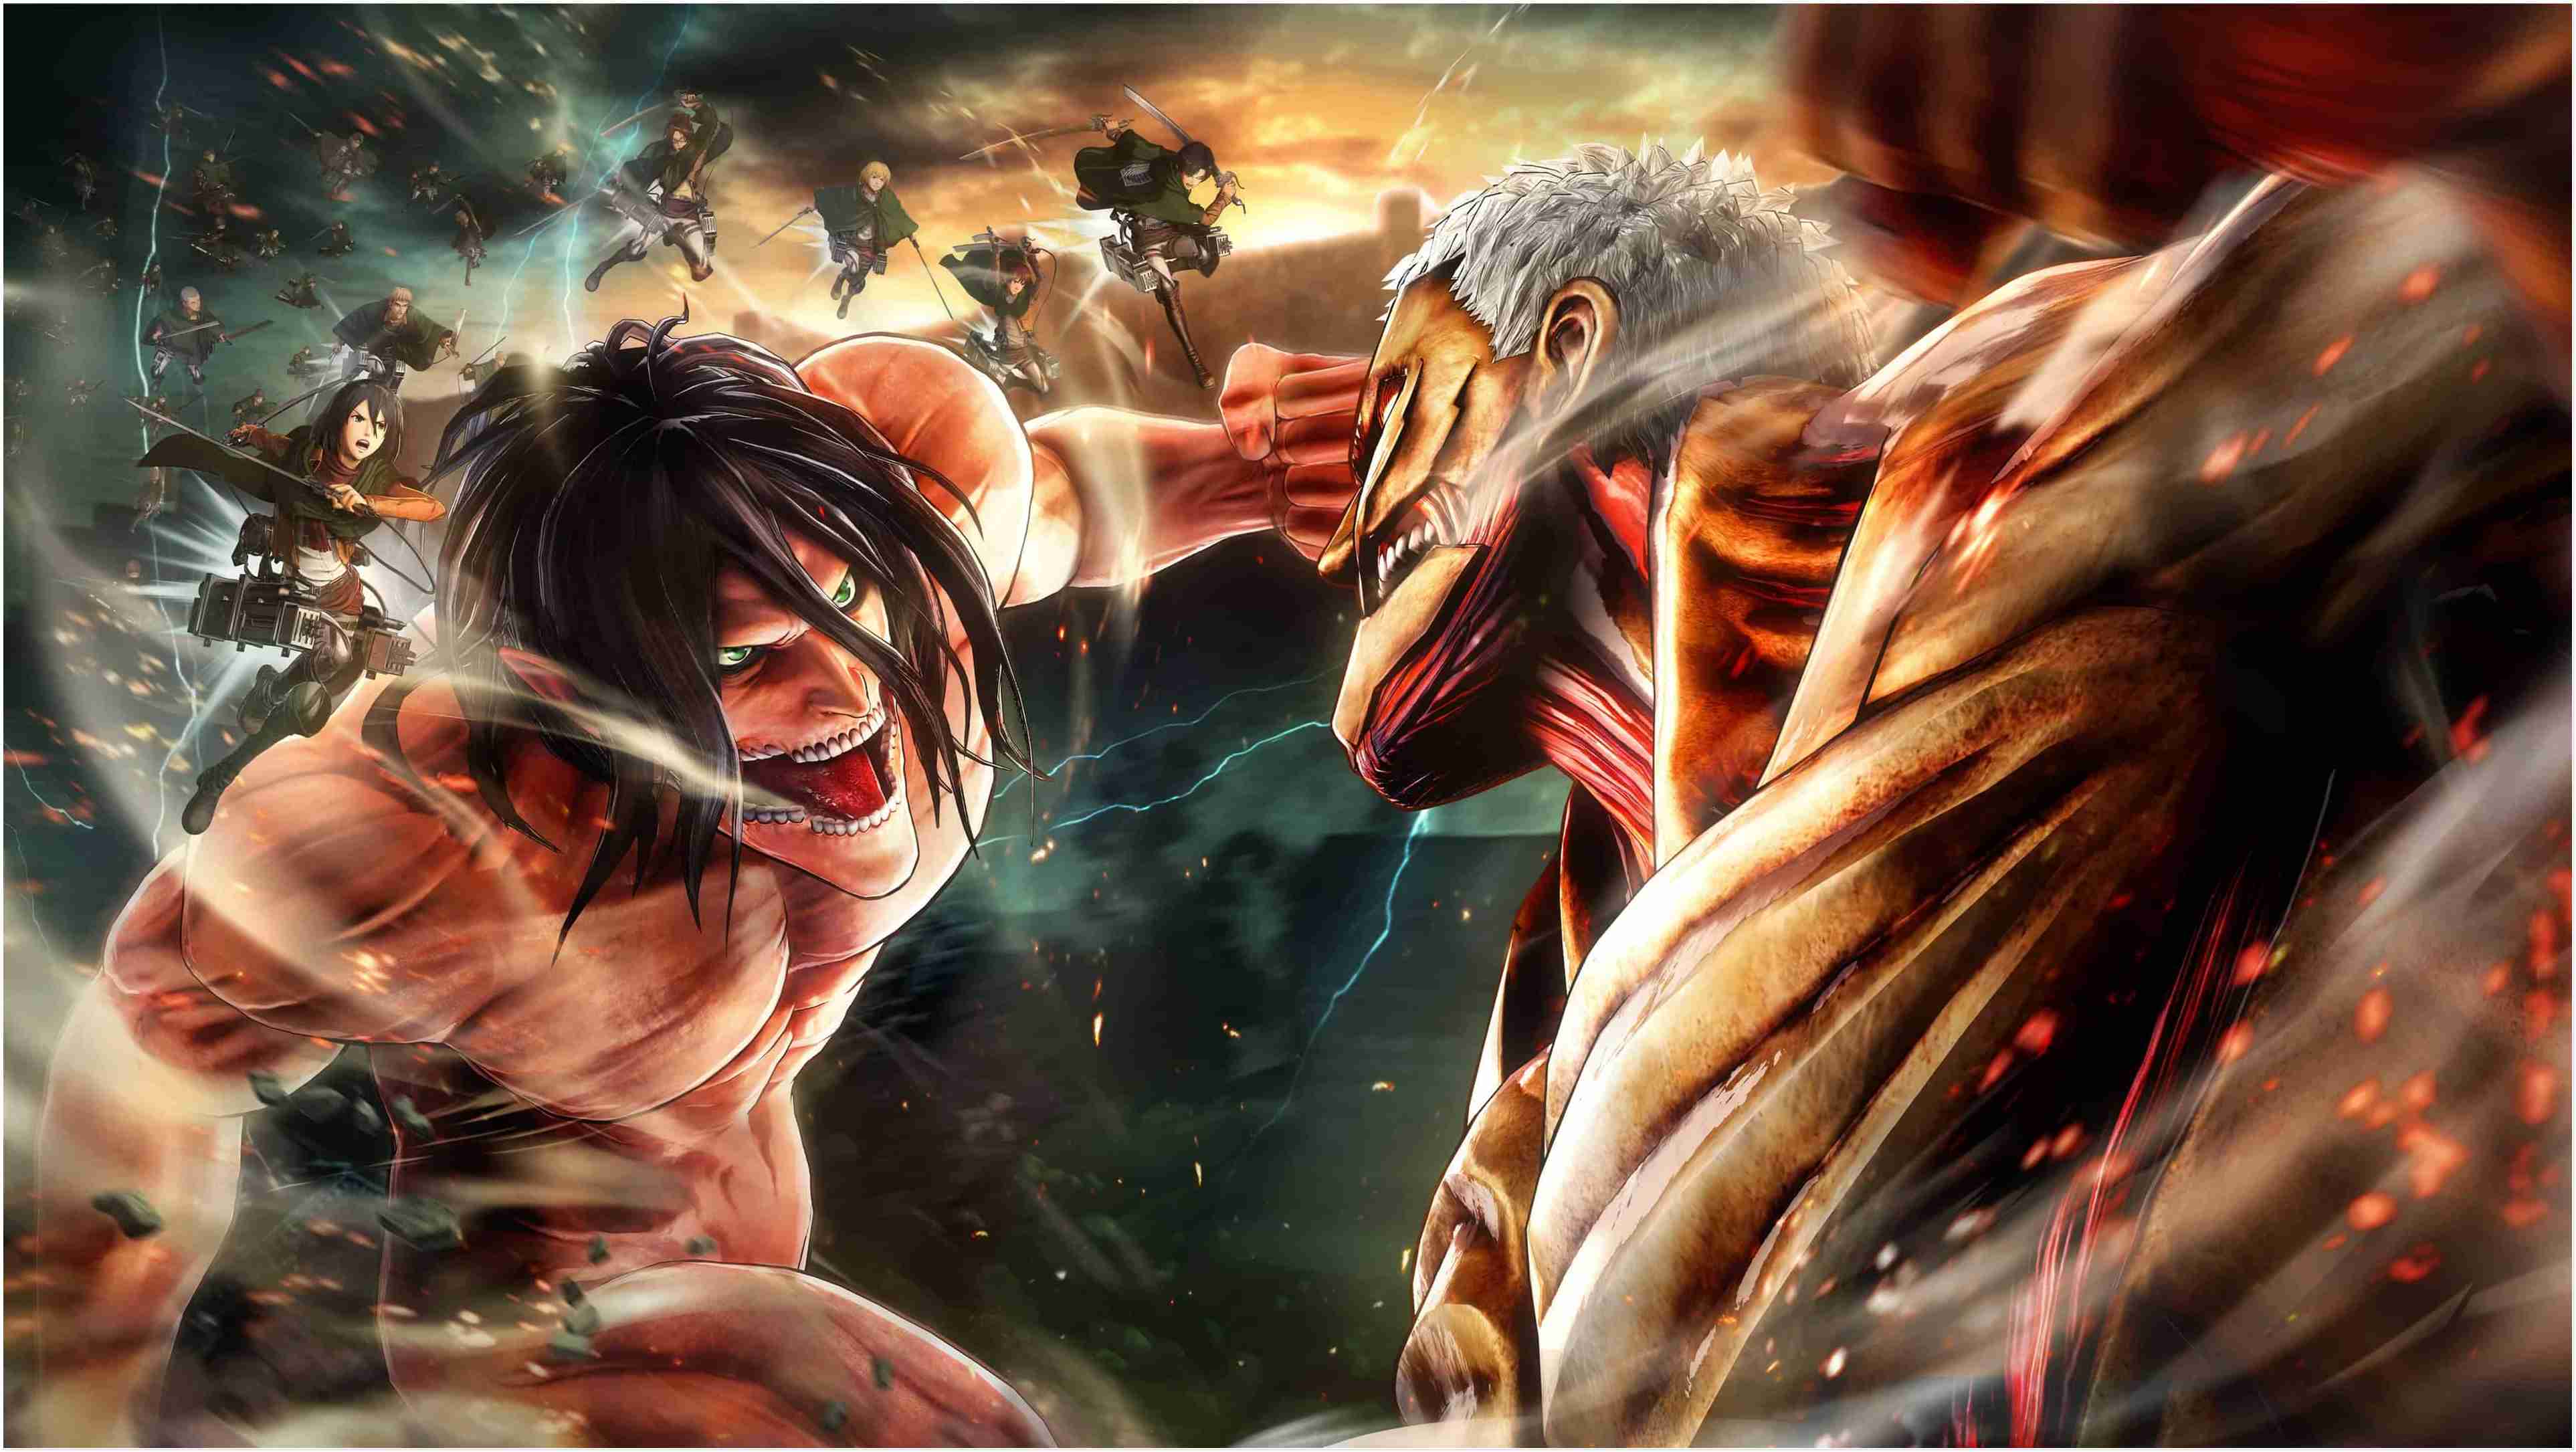 Hd Wallpaper 3840x1080 Attack On Titan Dual Monitor Wallpaper Pictures